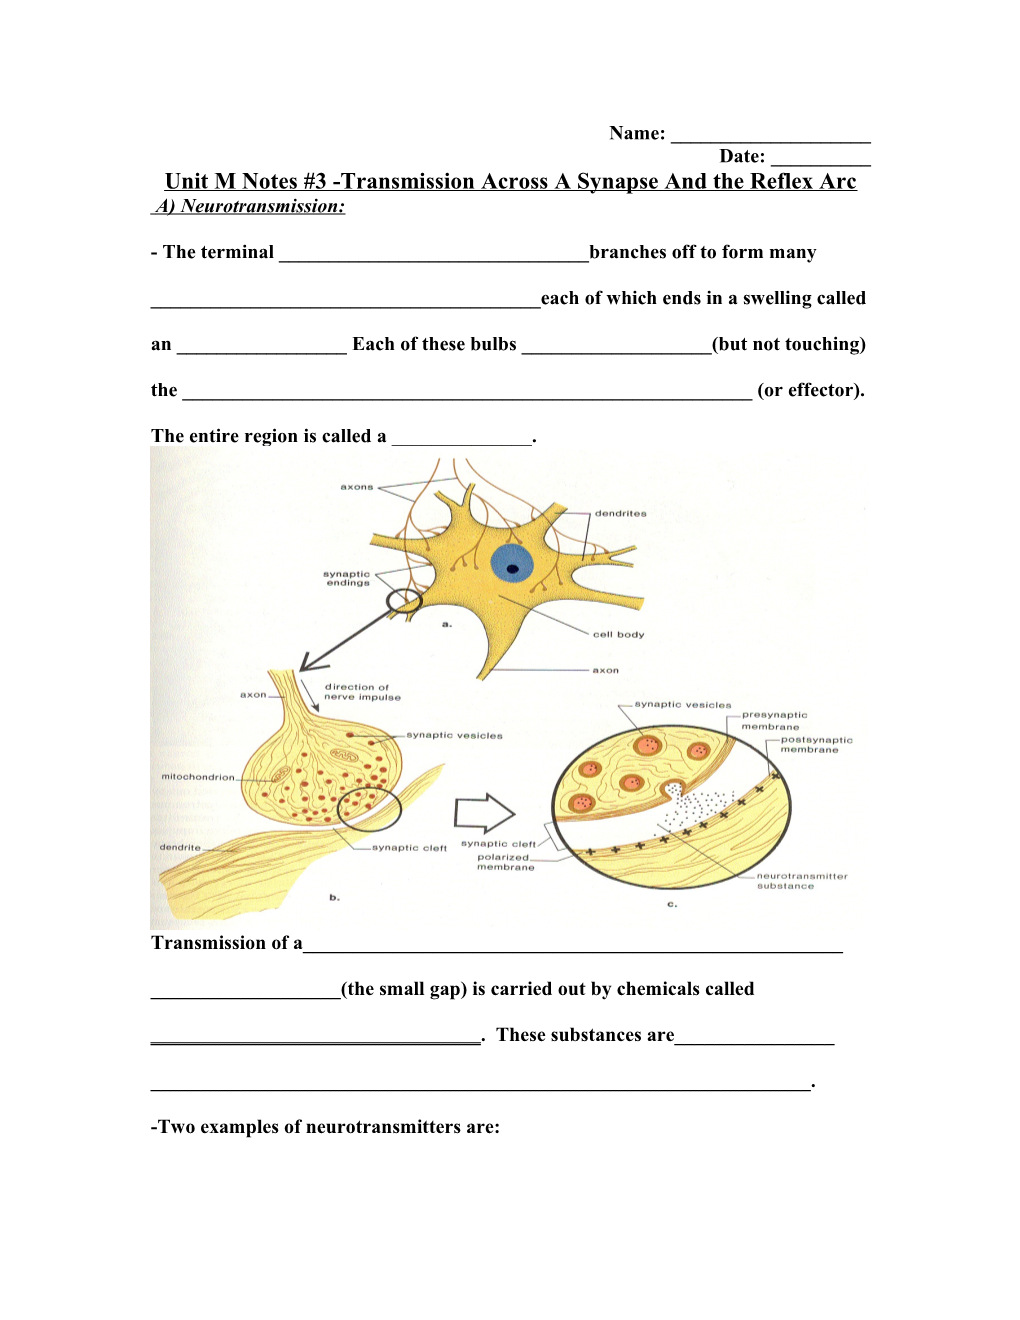 Unit M Notes #3 -Transmission Across a Synapse and the Reflex Arc